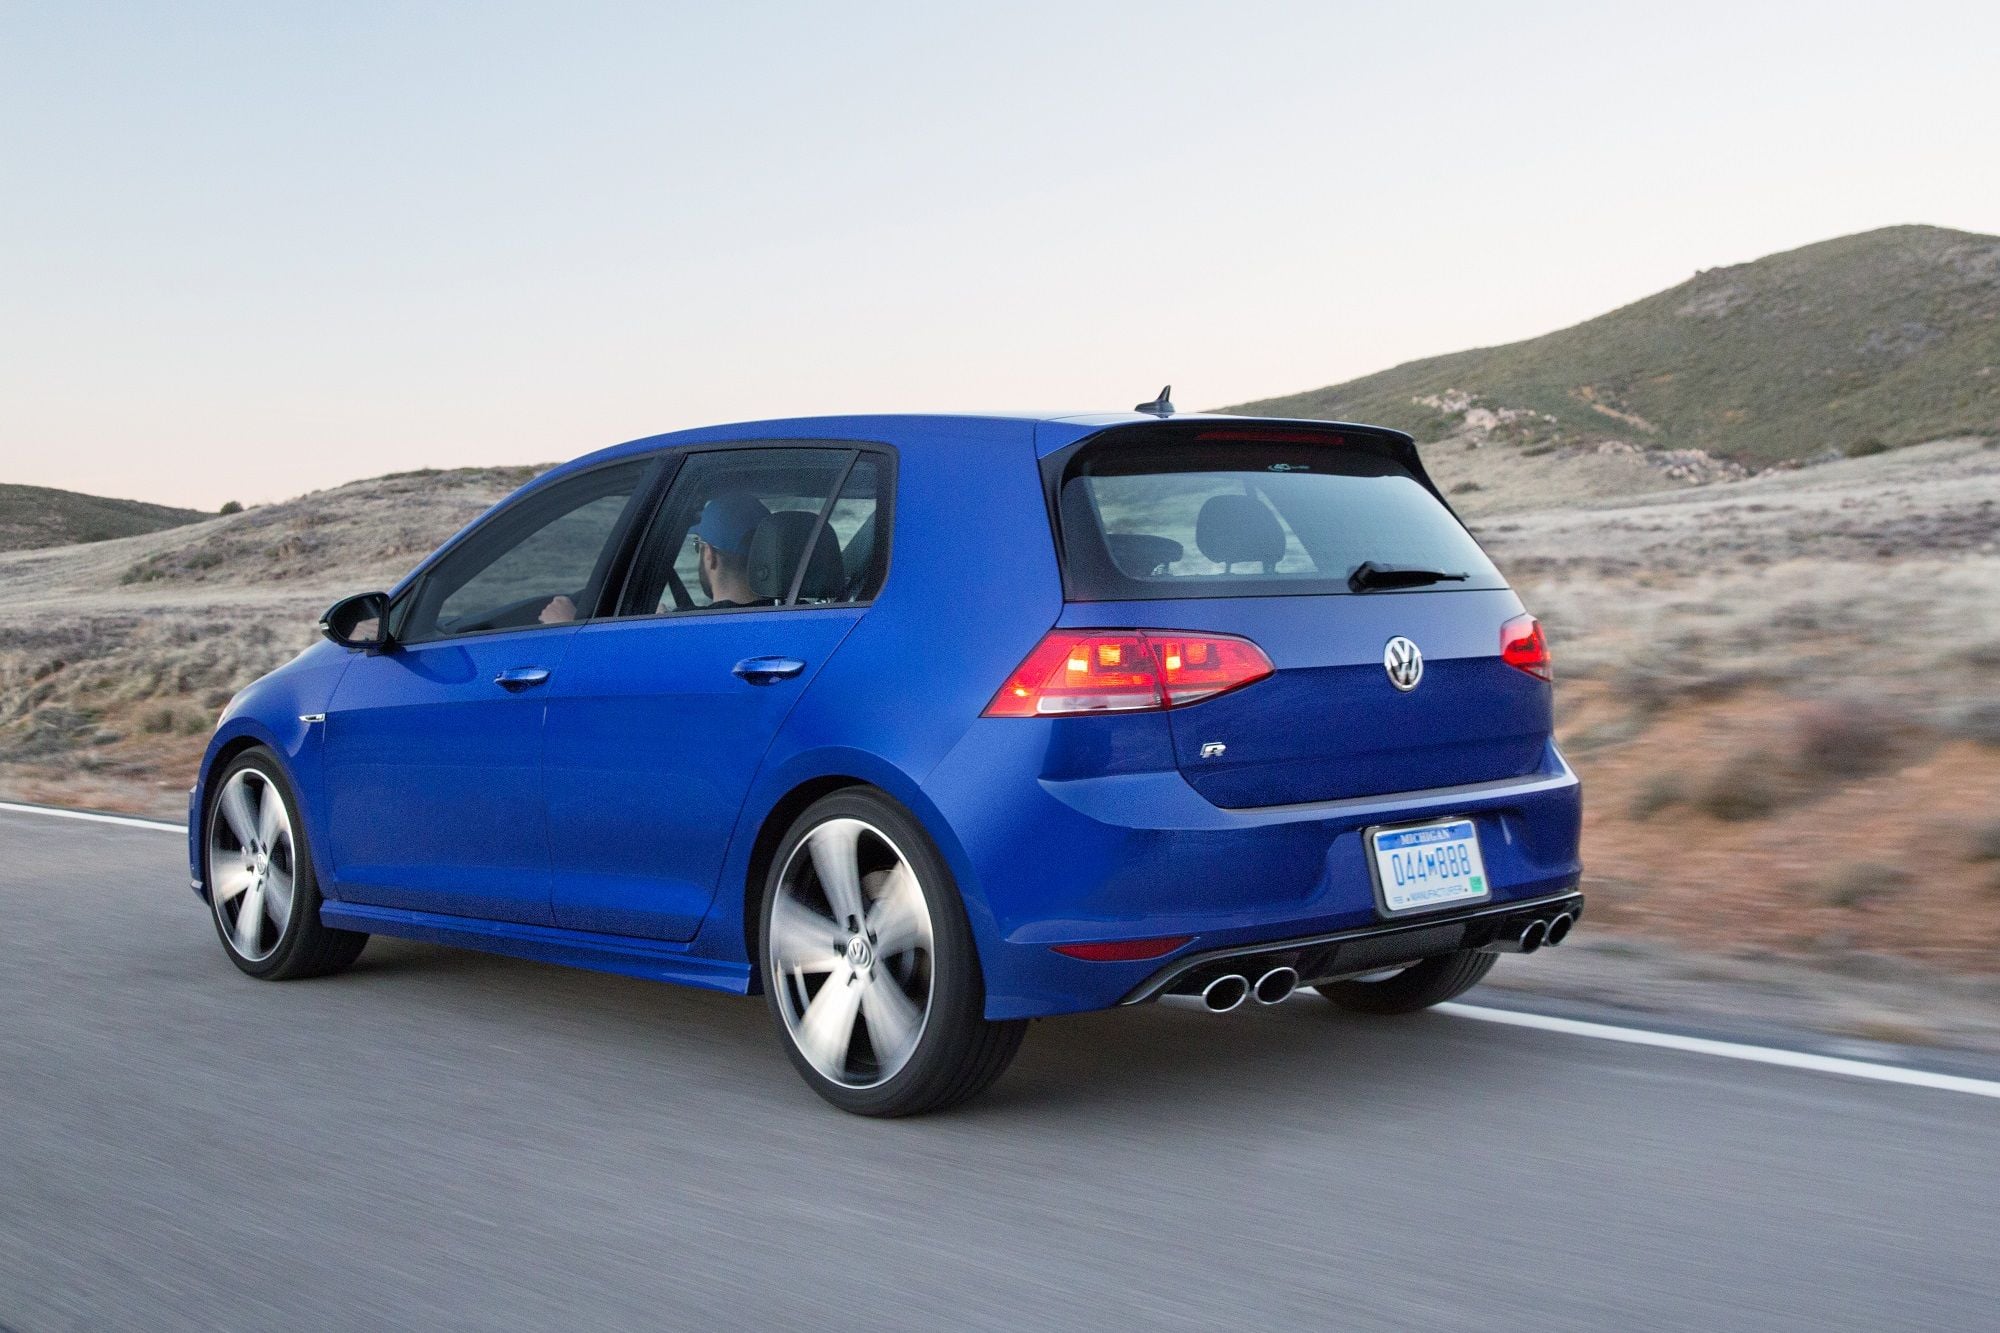 2017 Volkswagen Golf R: Preview Info, Pricing, Release Date